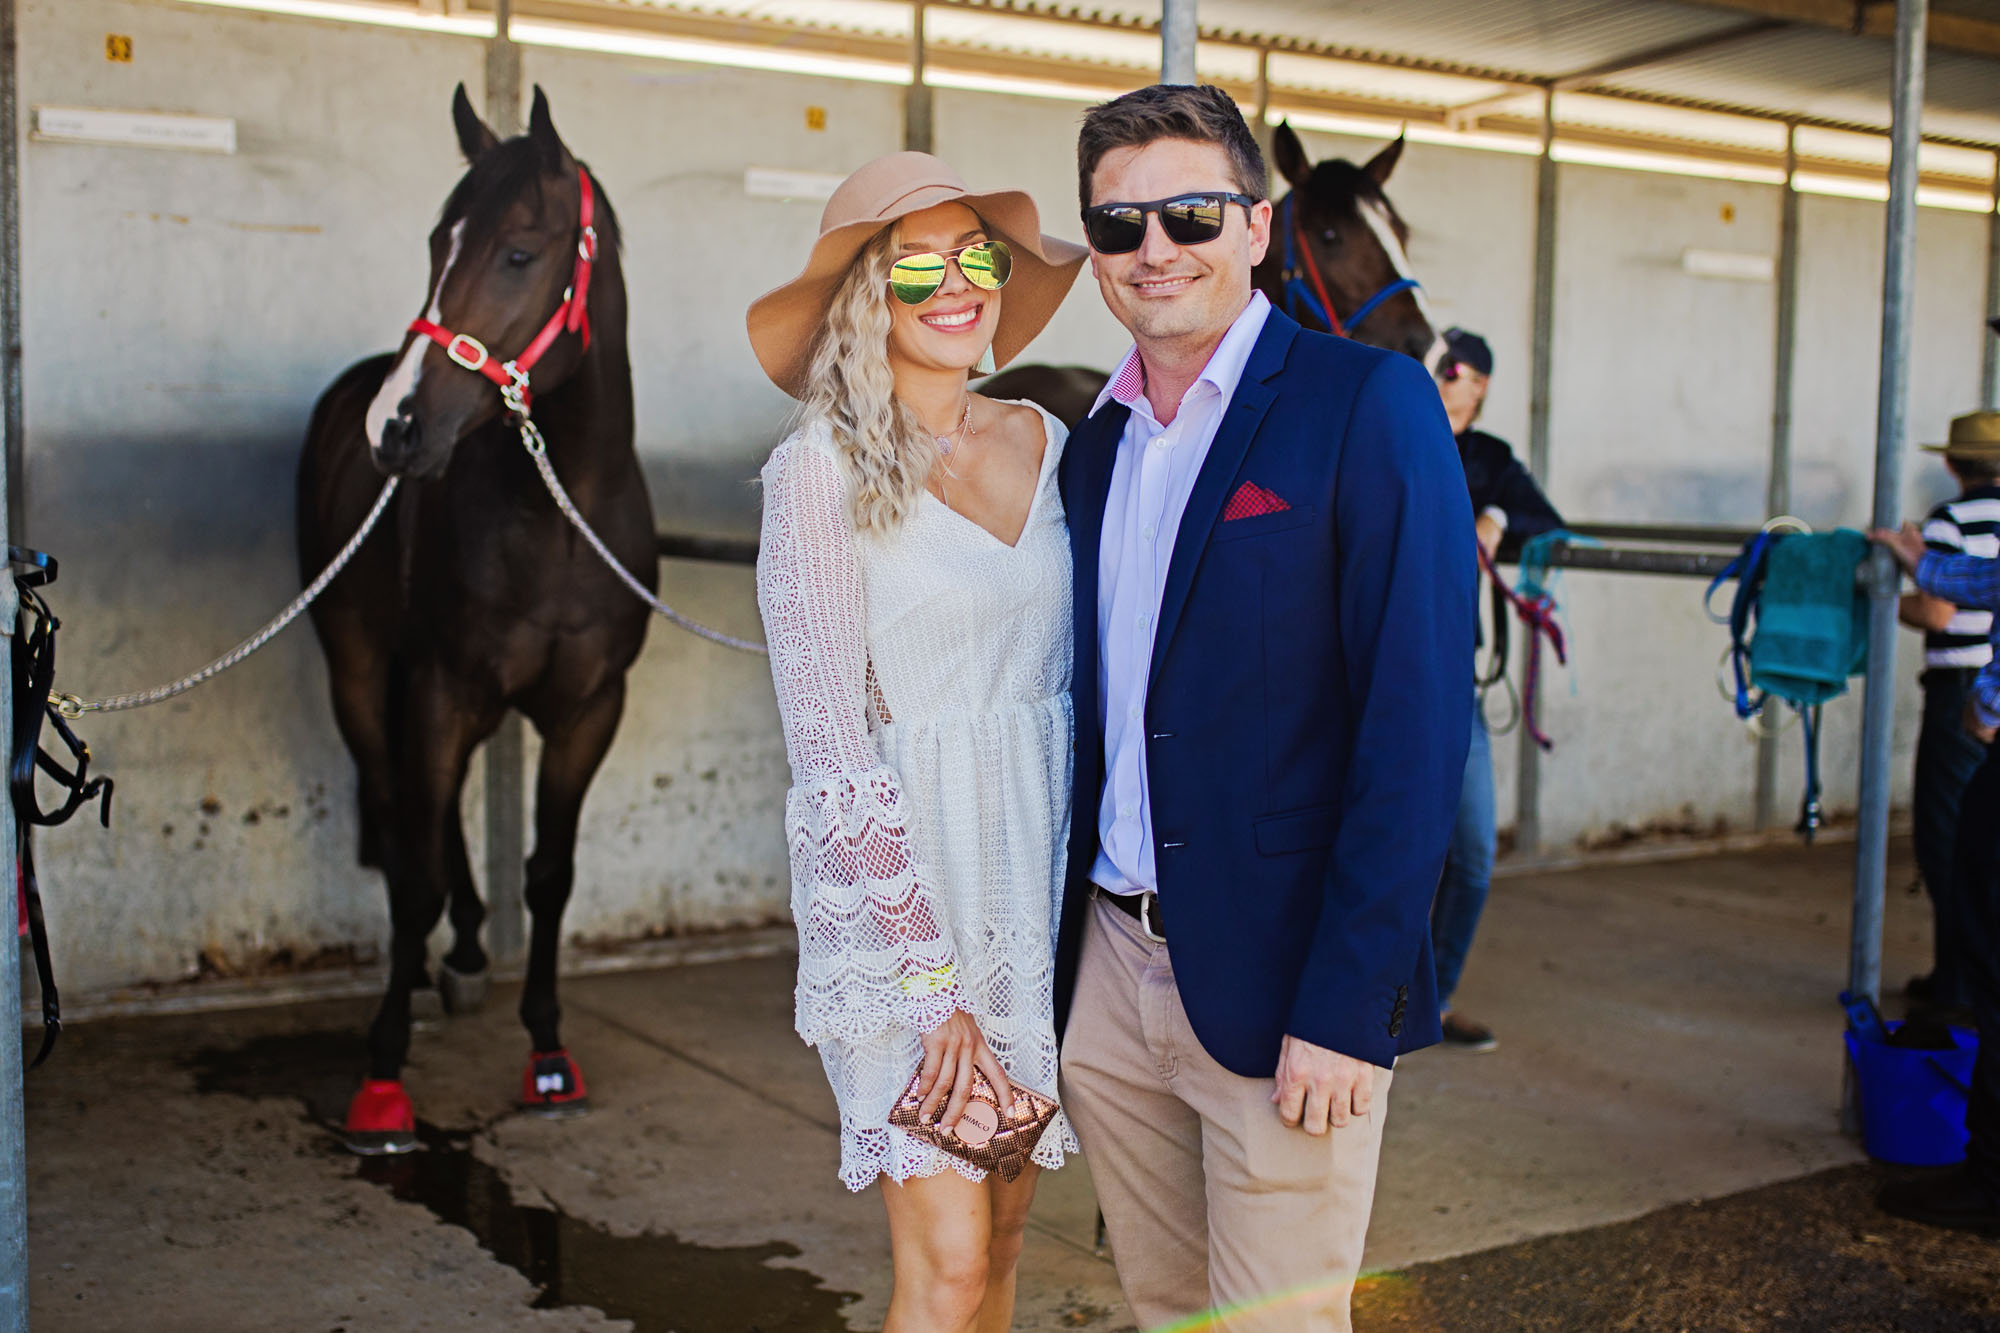 Fashionable Fillies at Dalby Picnic Races - Highlife Magazine2000 x 1333